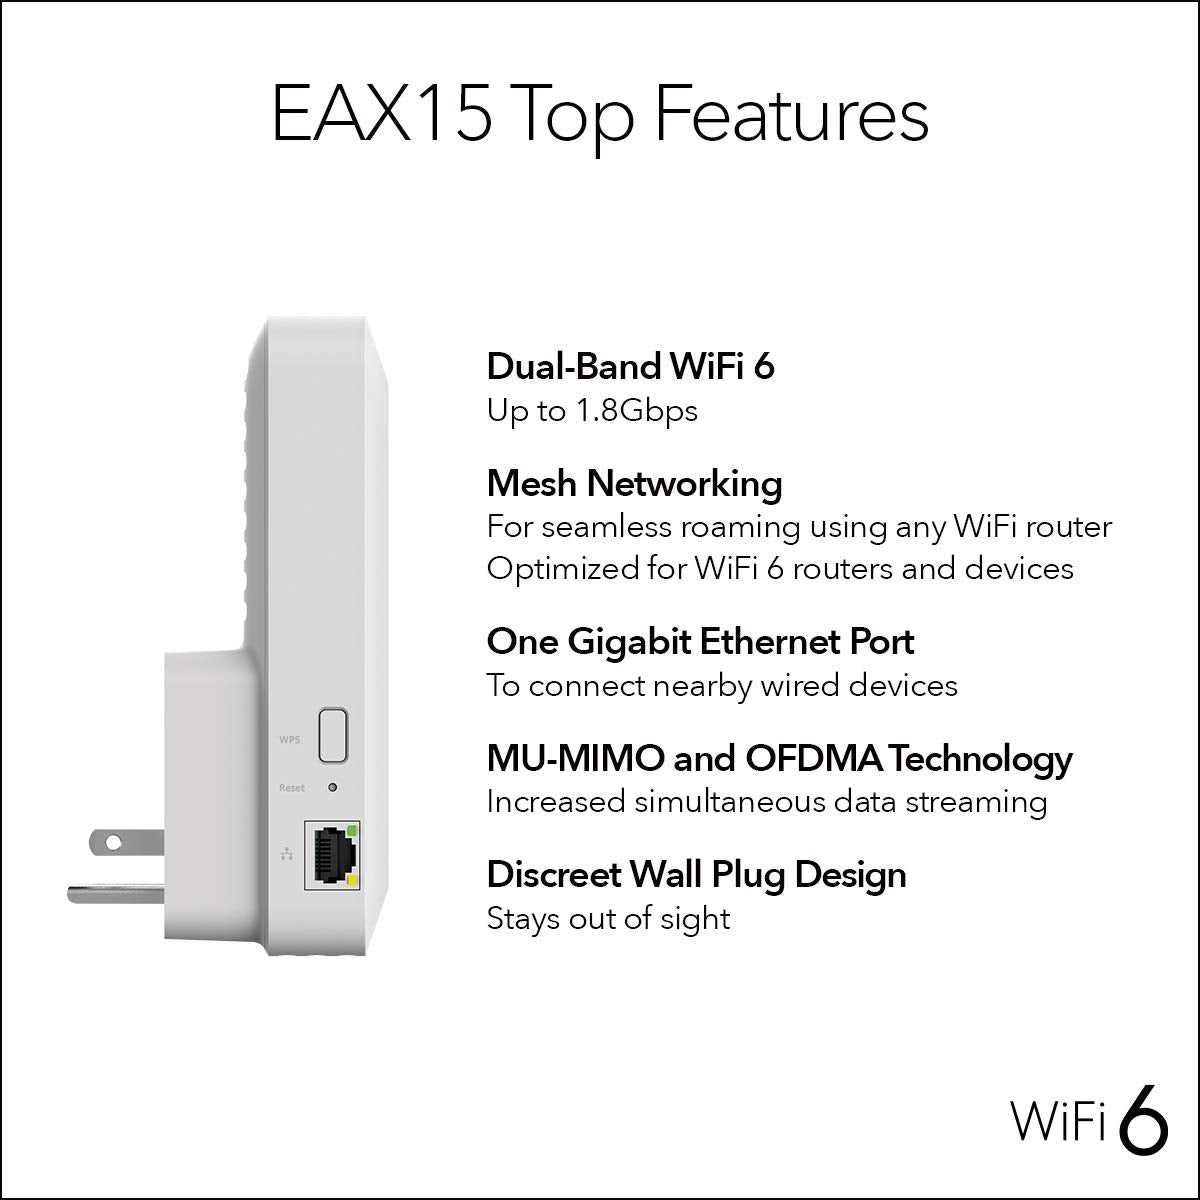 NETGEAR WiFi 6 Mesh Range Extender (EAX15) - Add up to 1,500 sq. ft. and 20+ Devices with AX1800 Dual-Band Wireless Signal Booster & Repeater (up to 1.8Gbps Speed), WPA3 Security, Smart Roaming